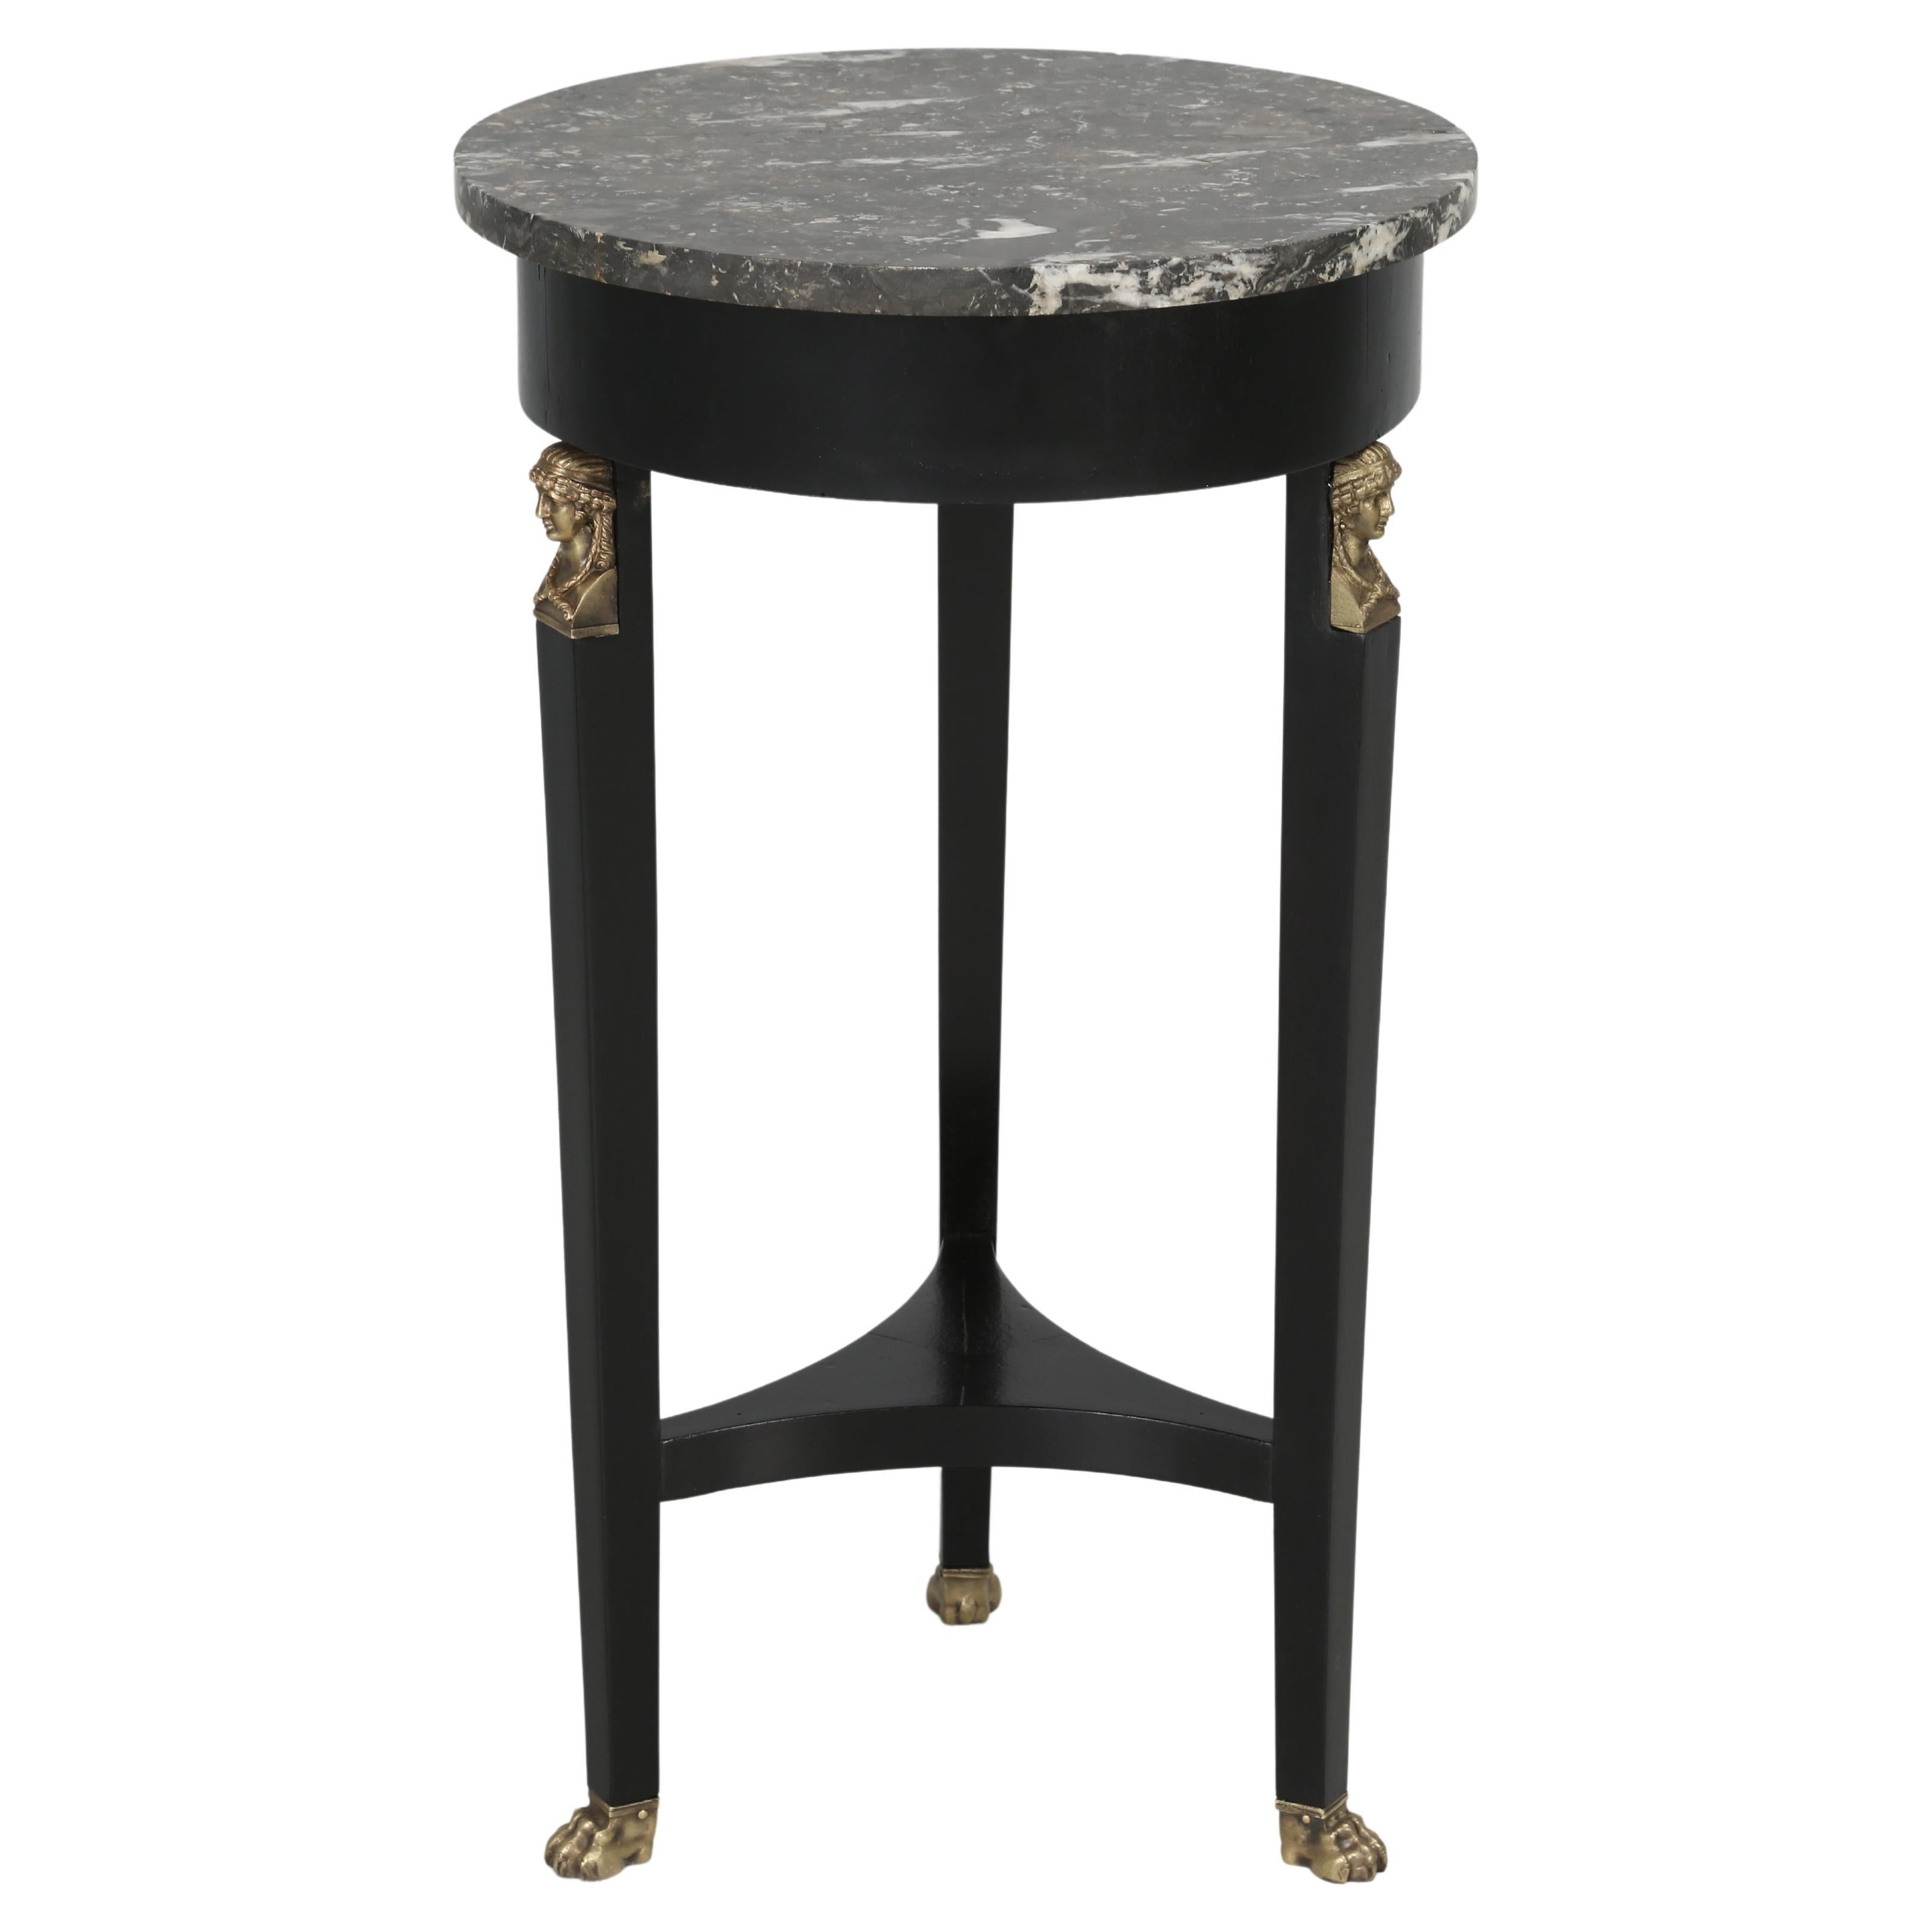 Antique French Empire Style Ebonized Mahogany Round Table with Marble Top